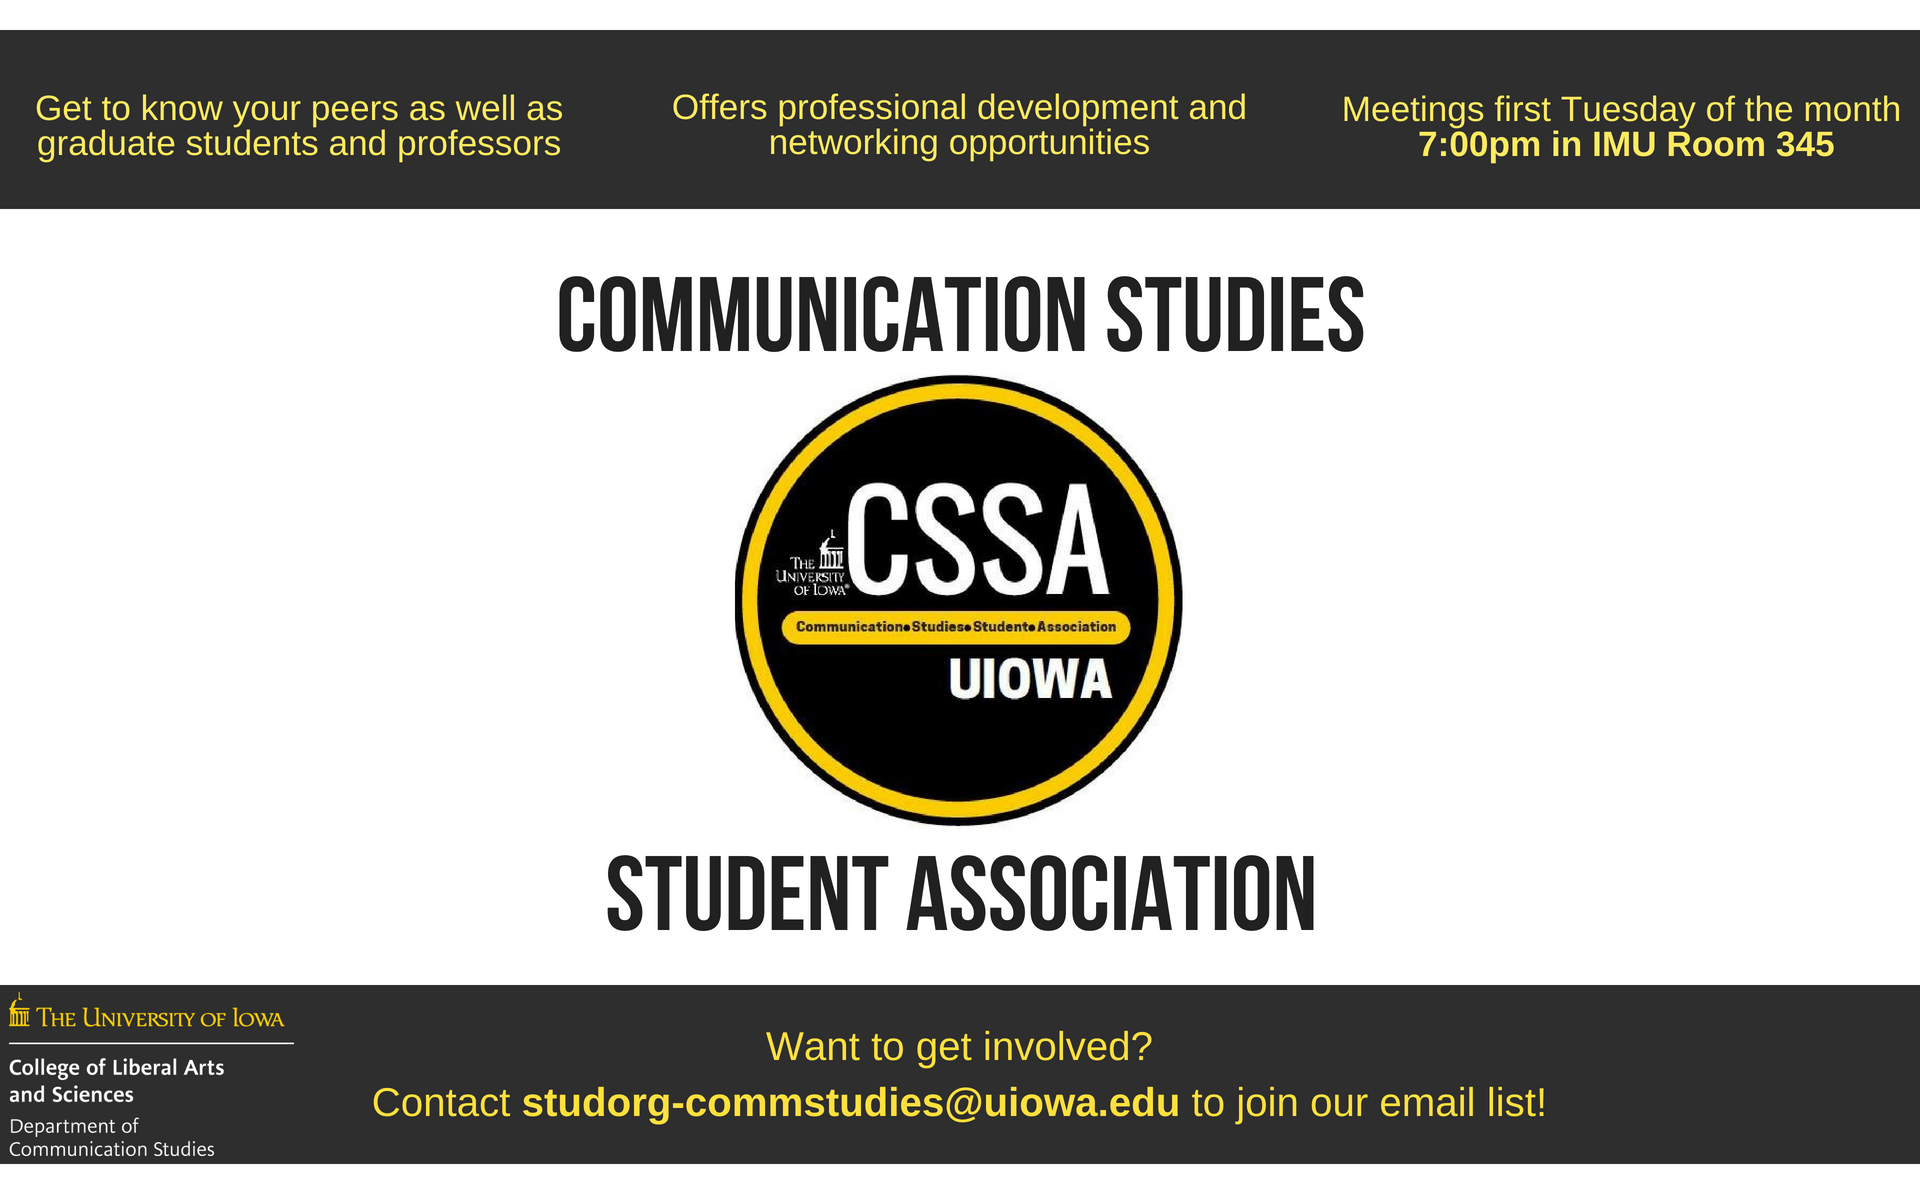 Communication Studies Student Association: Get to know your peers as well as graduate students and professors, Offers professional development and networking opportunities, Meetings first Tuesday of the month  7:00pm in IMU Room 345, Want to get involved? Contact studorg-commstudies@uiowa.edu to join our email list!